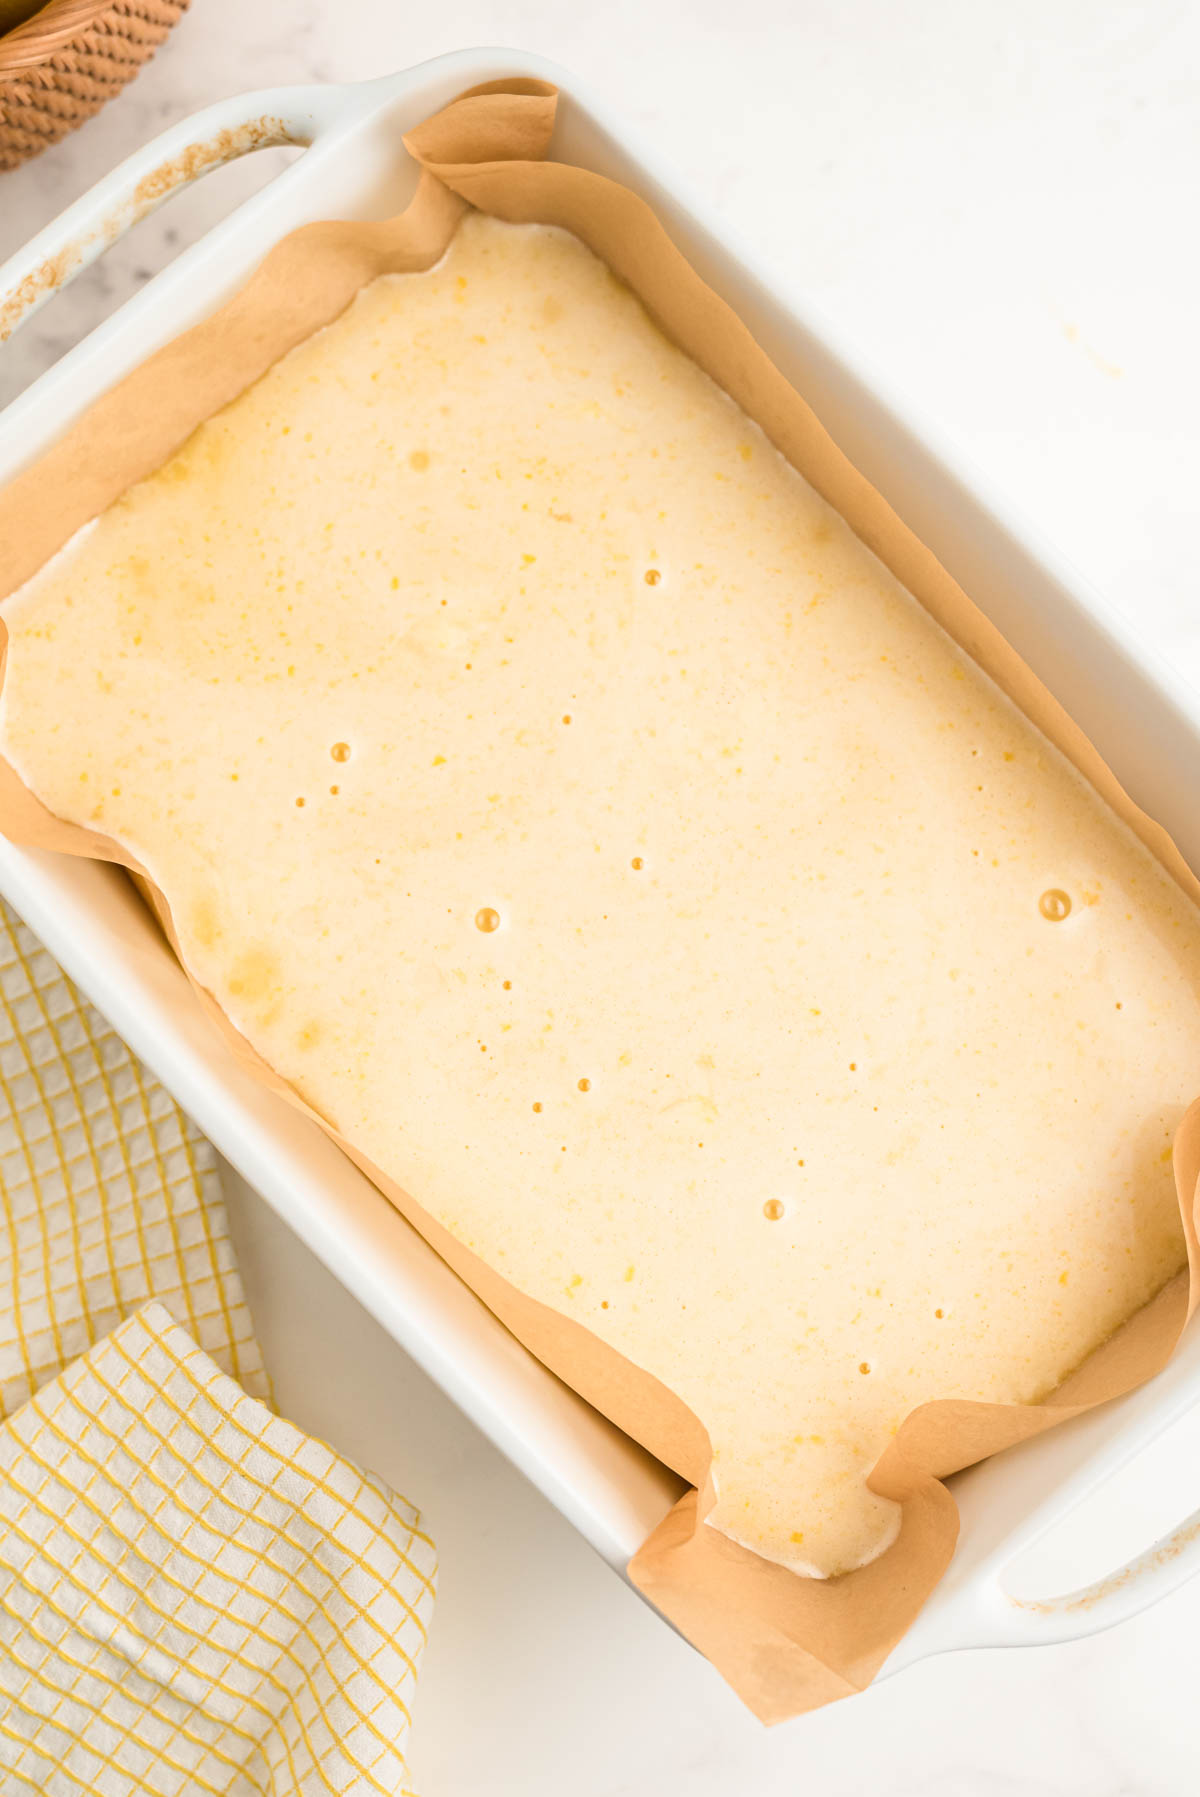 A baking dish with with unbaked lemon bars in it